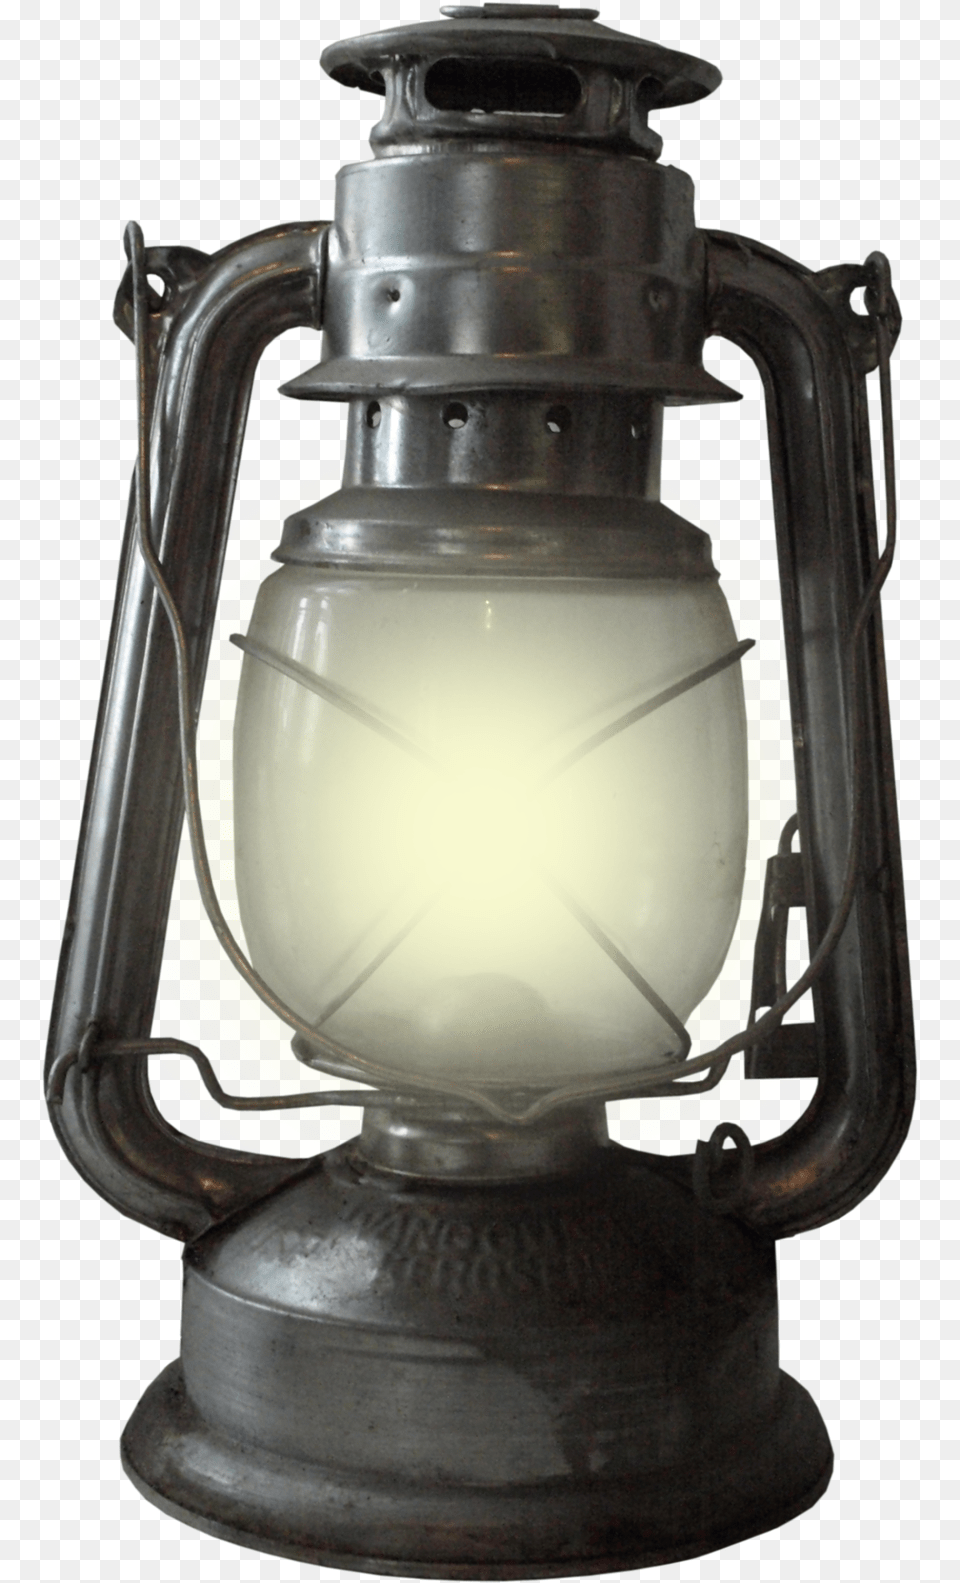 Pin By Hector Haralambous On Objects In 2019 Petromax Lamp, Lantern, Bottle, Shaker Free Png